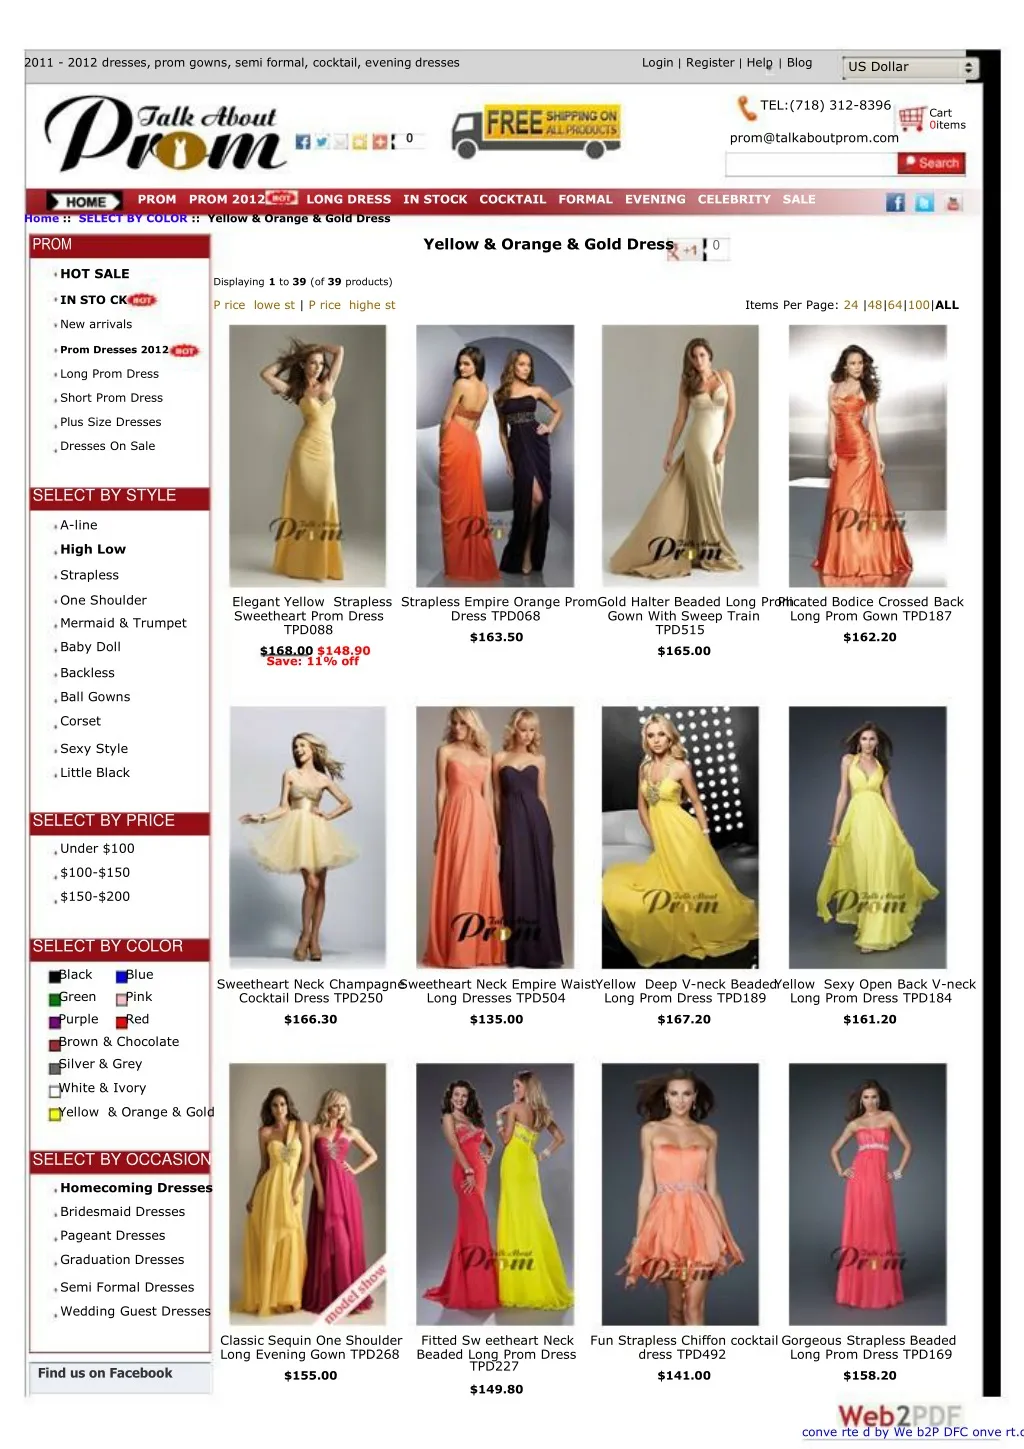 2011 2012 dresses prom gowns semi formal cocktail